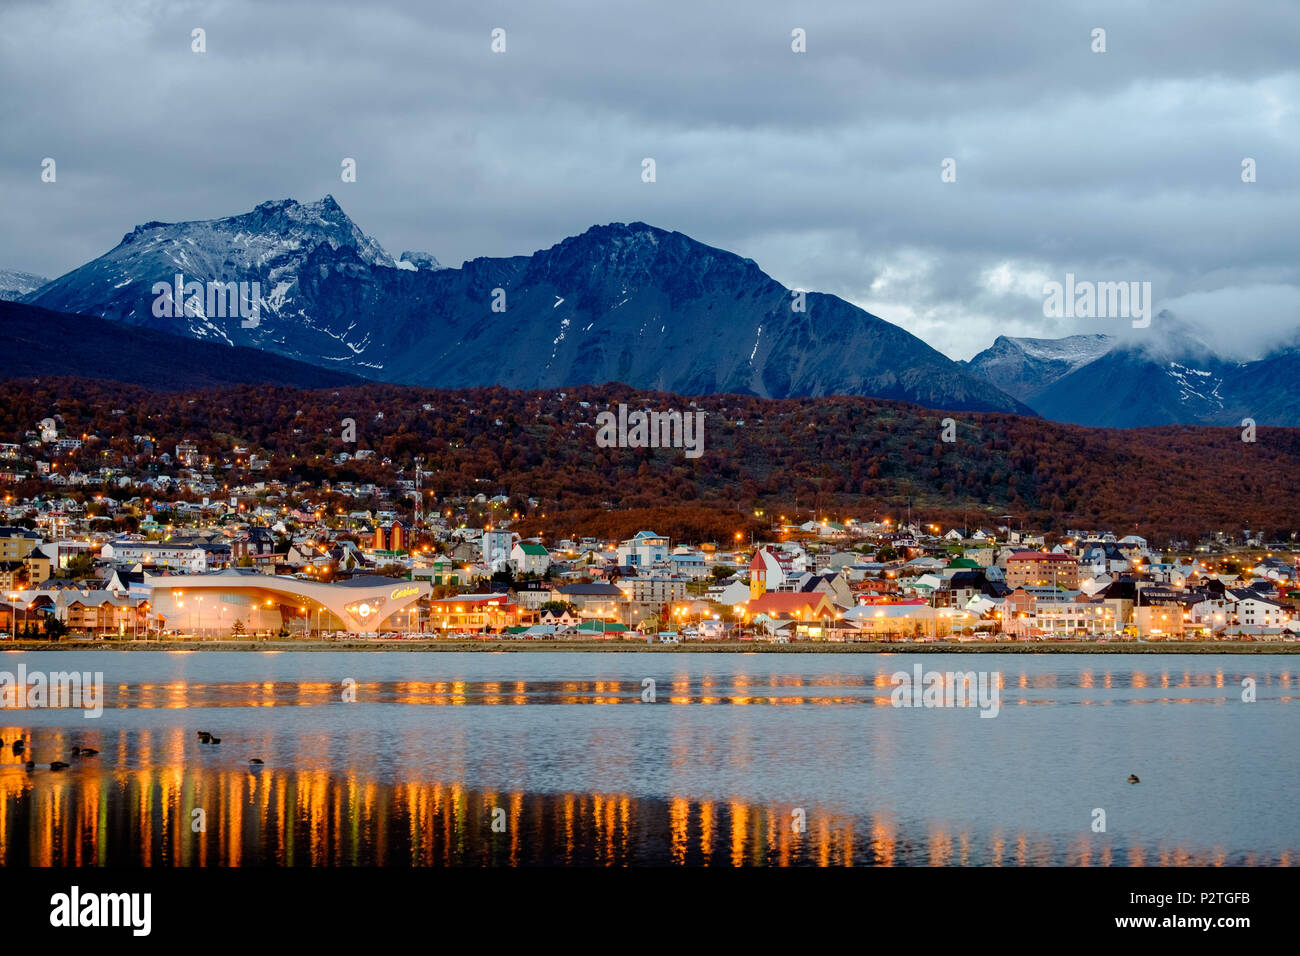 The 'Bahía Encerrada' reflects the city lights of Ushuaia. It is automn and the trees have a strong color. Ushuaia is often very cloudy. Stock Photo